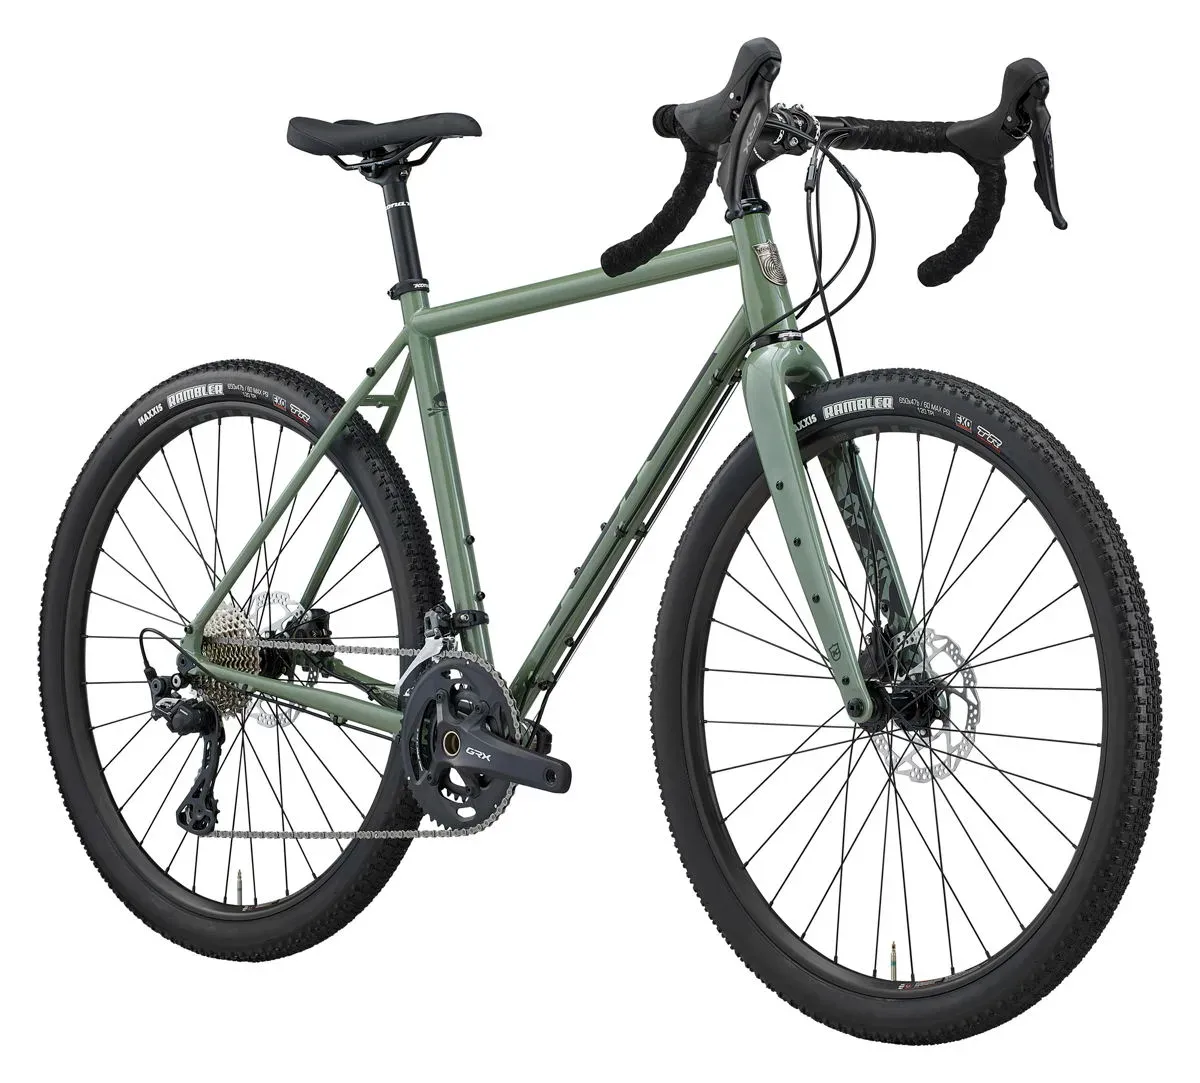 Kona Rove: Versatile Bike for All Seasons and Terrains | Specifications, Features, and Pricing